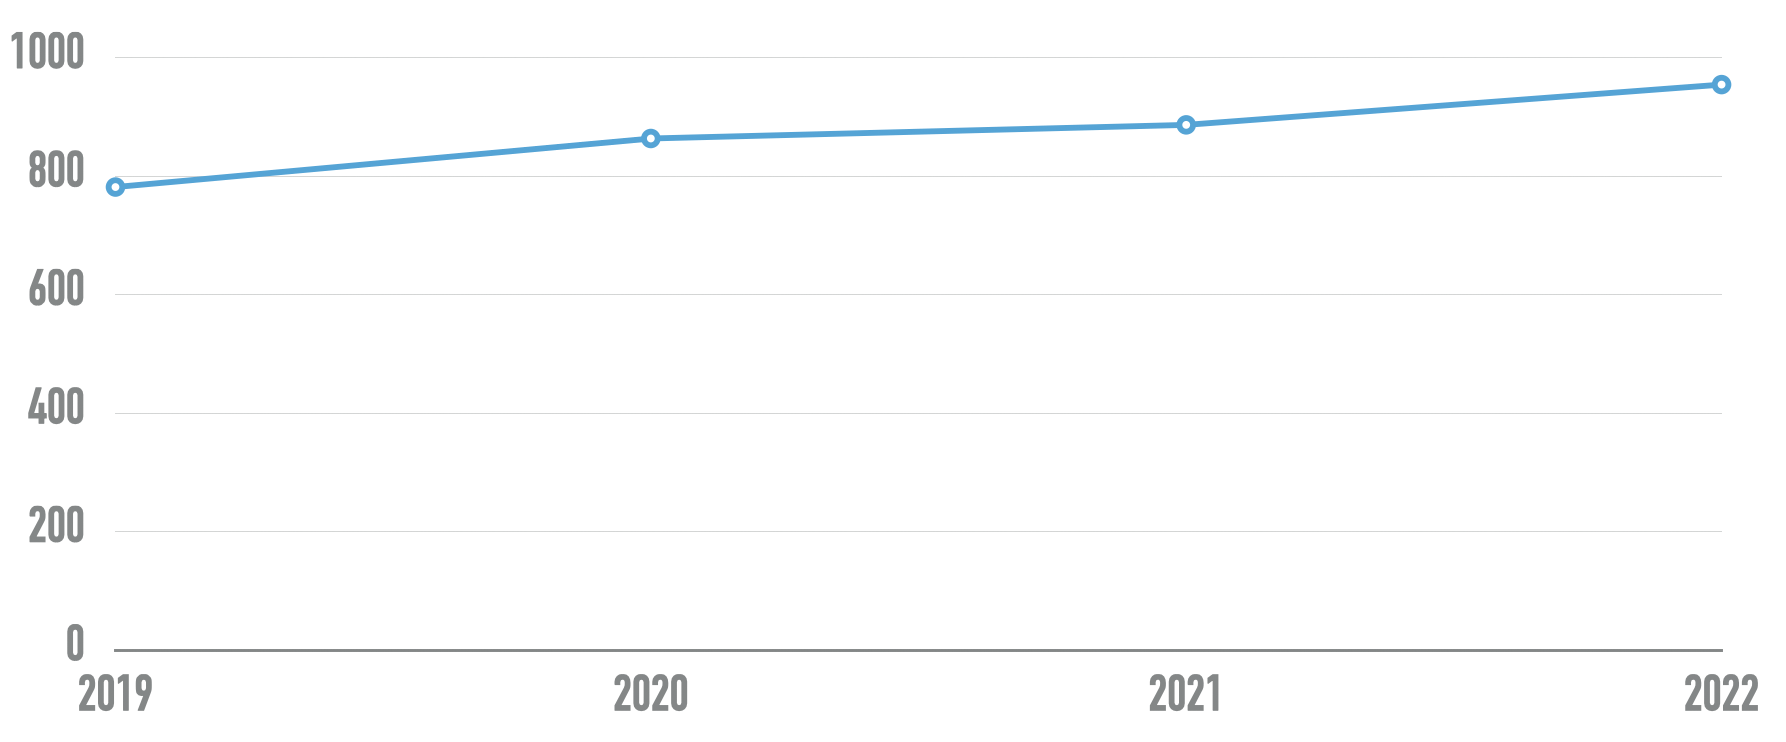 Line chart showing number of home page elements steadily increasing from 782 in 2019 to 955 in 2022.